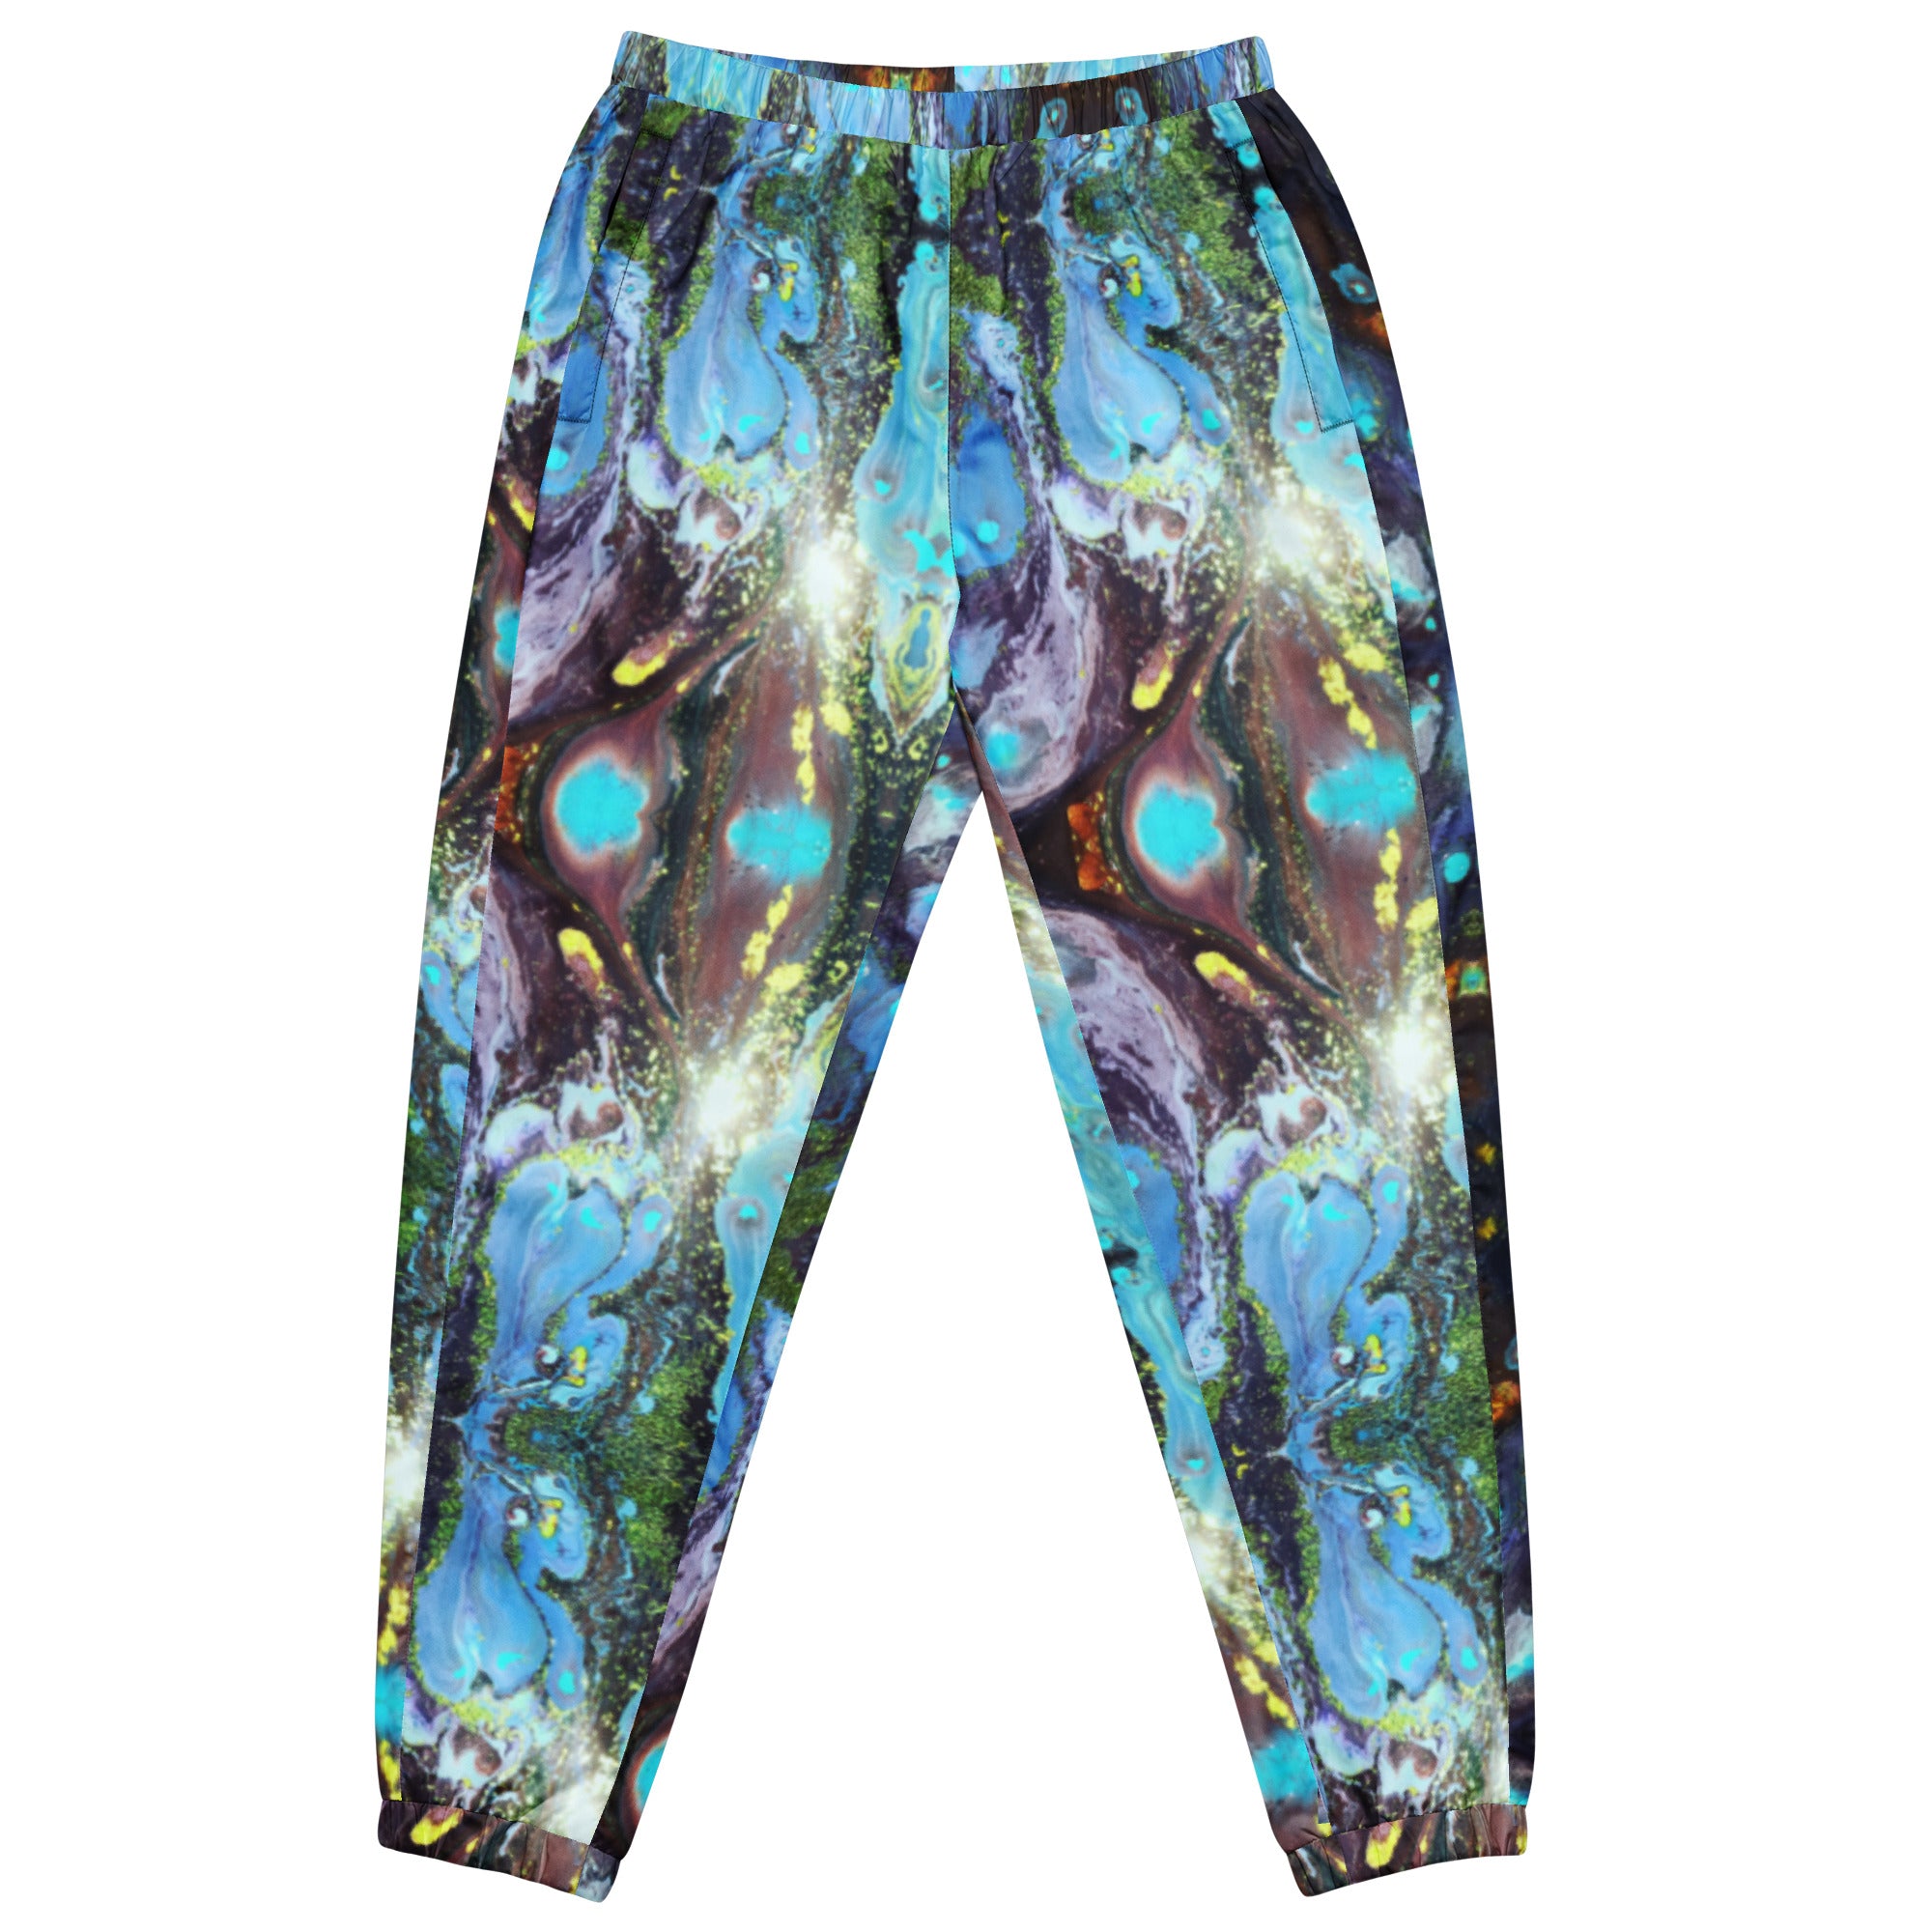 Unisex track pants, blue galaxy – The Pastel Abstract